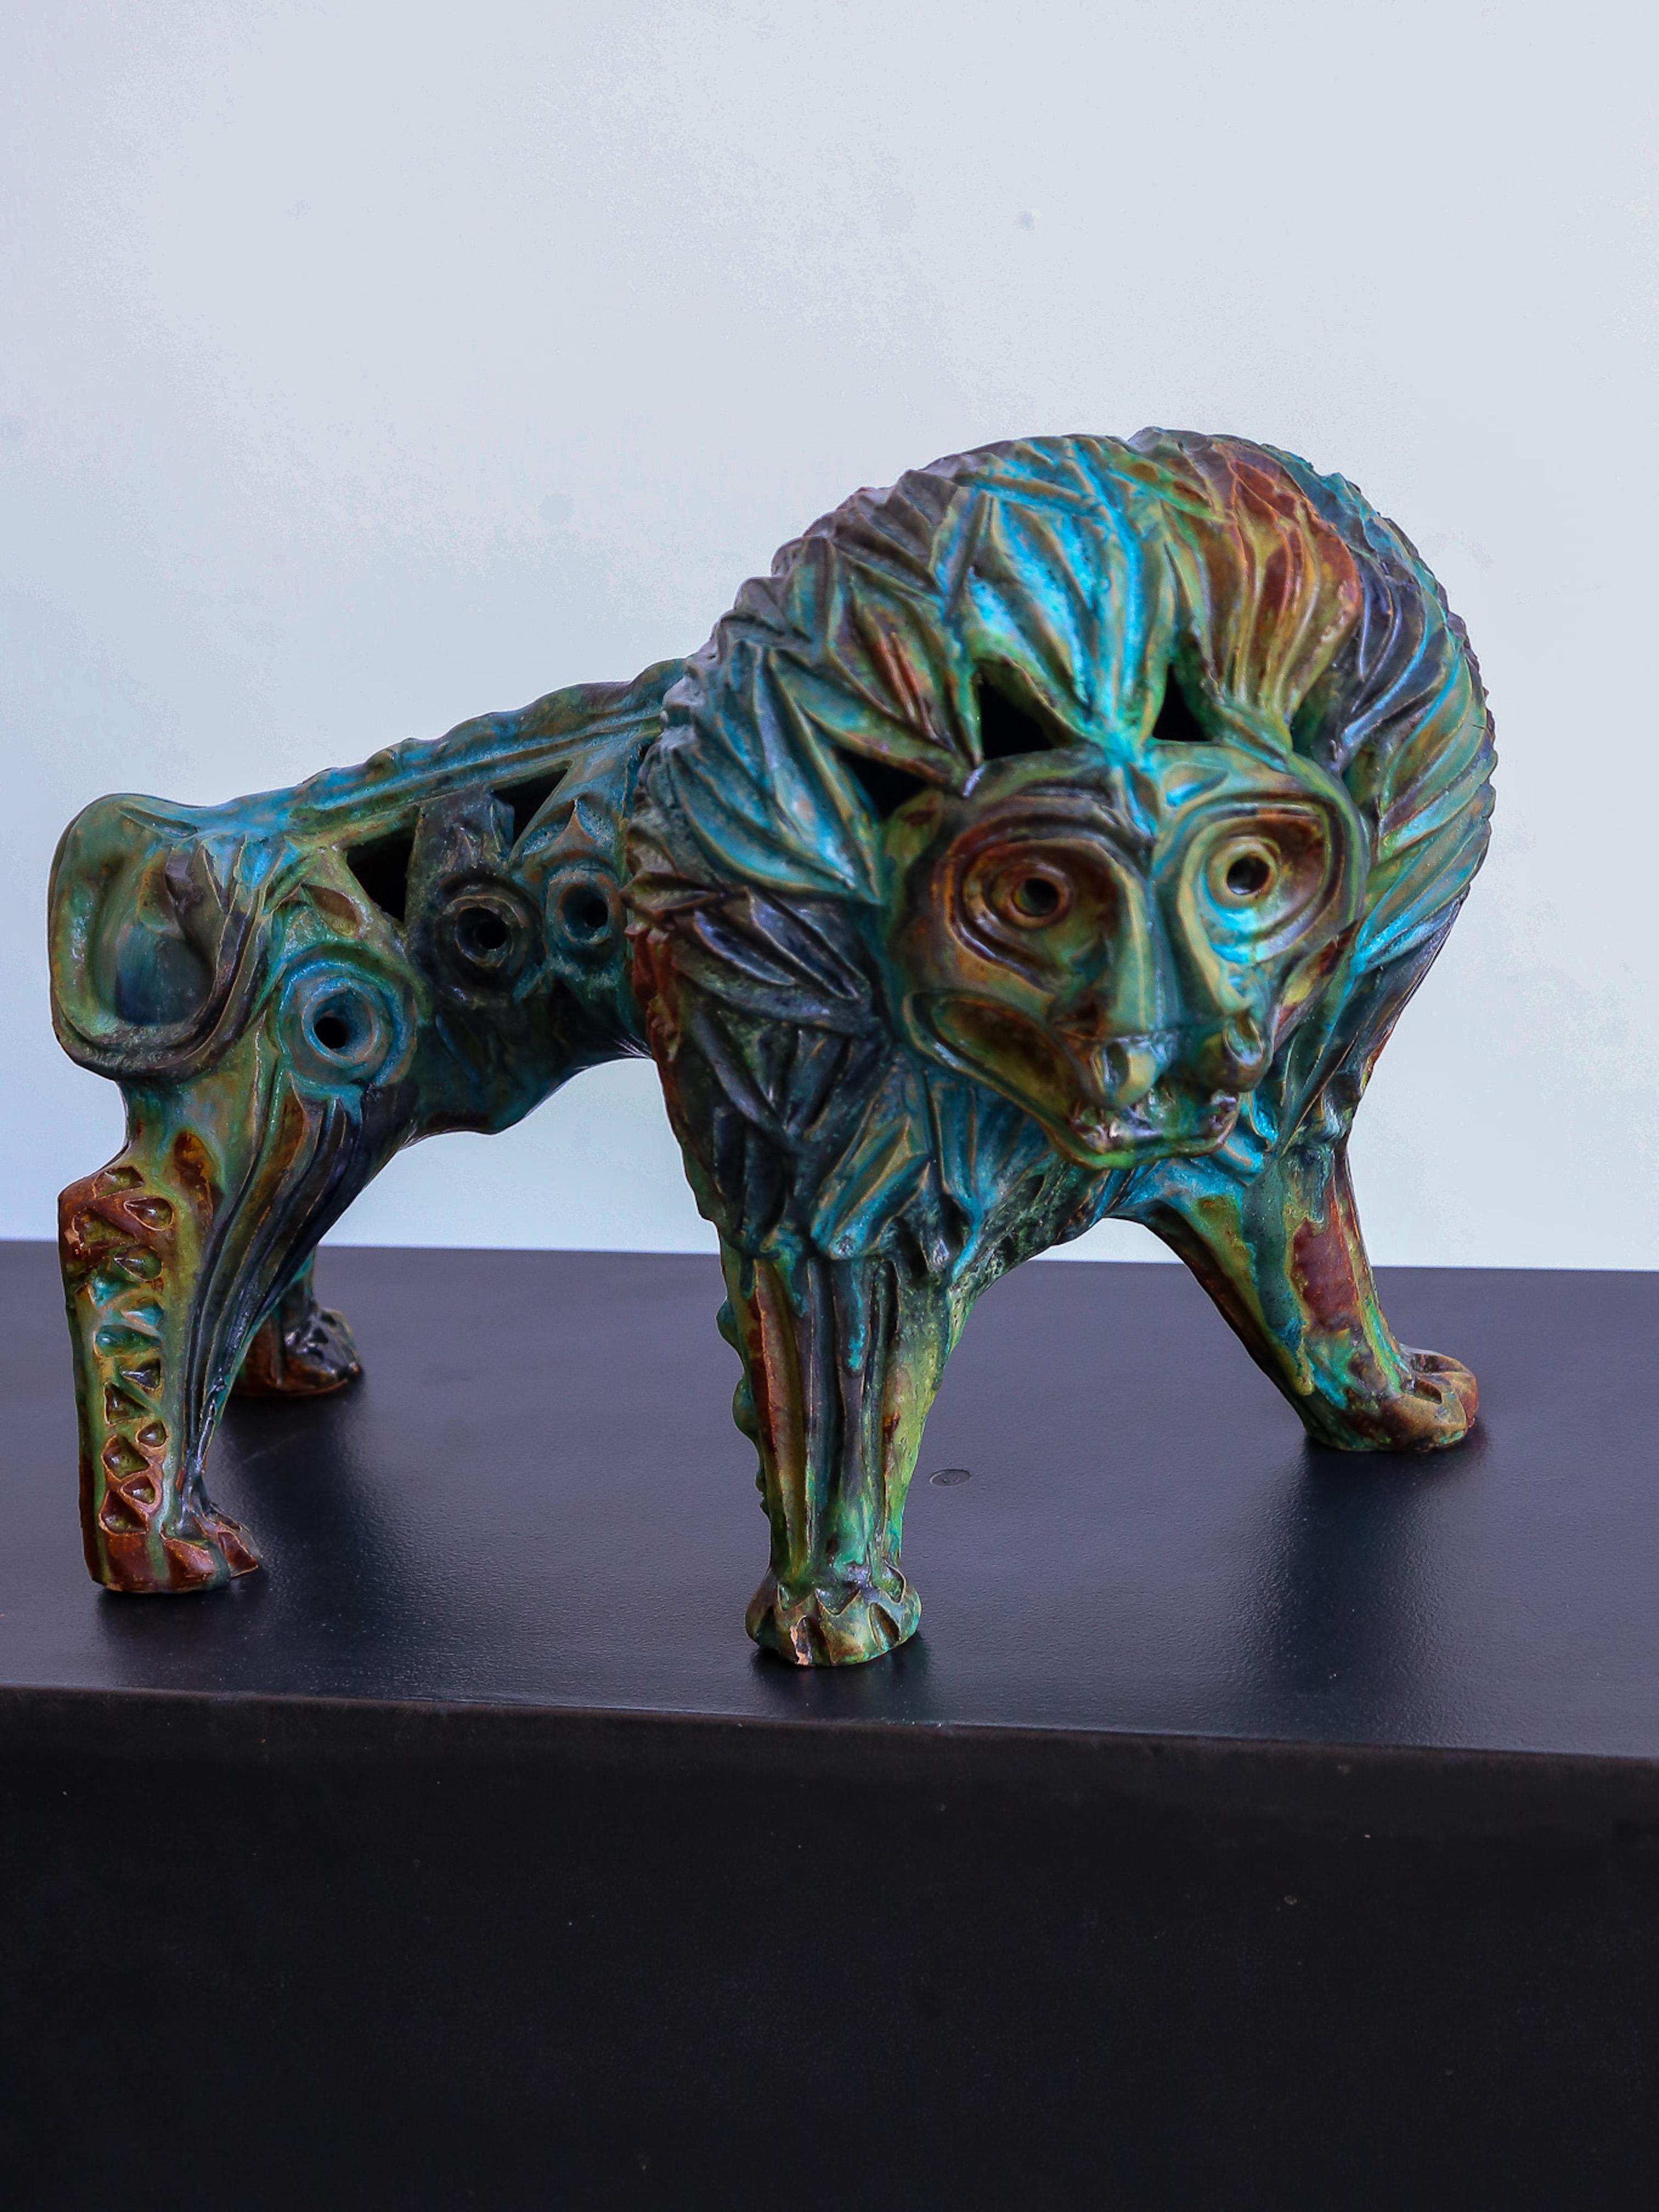 Large Bitossi lion by the famous Alvino Bagni.

Alvino Bagni (1919–2000) was an Italian ceramic artist known for his exquisite work in pottery and ceramics. He was active during the mid-20th century and gained recognition for his remarkable